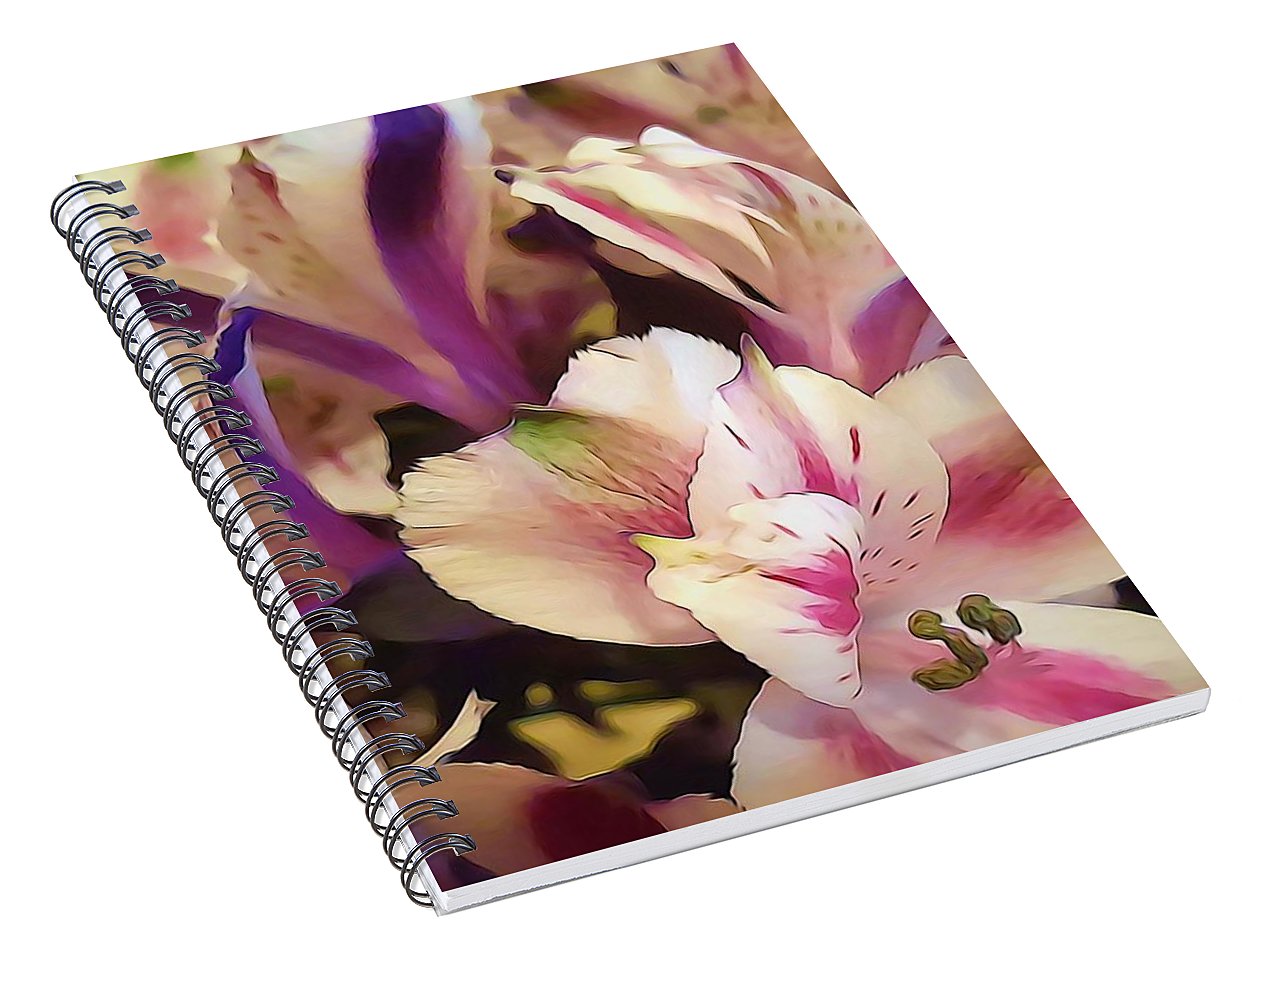 Pink and White Flowers - Spiral Notebook